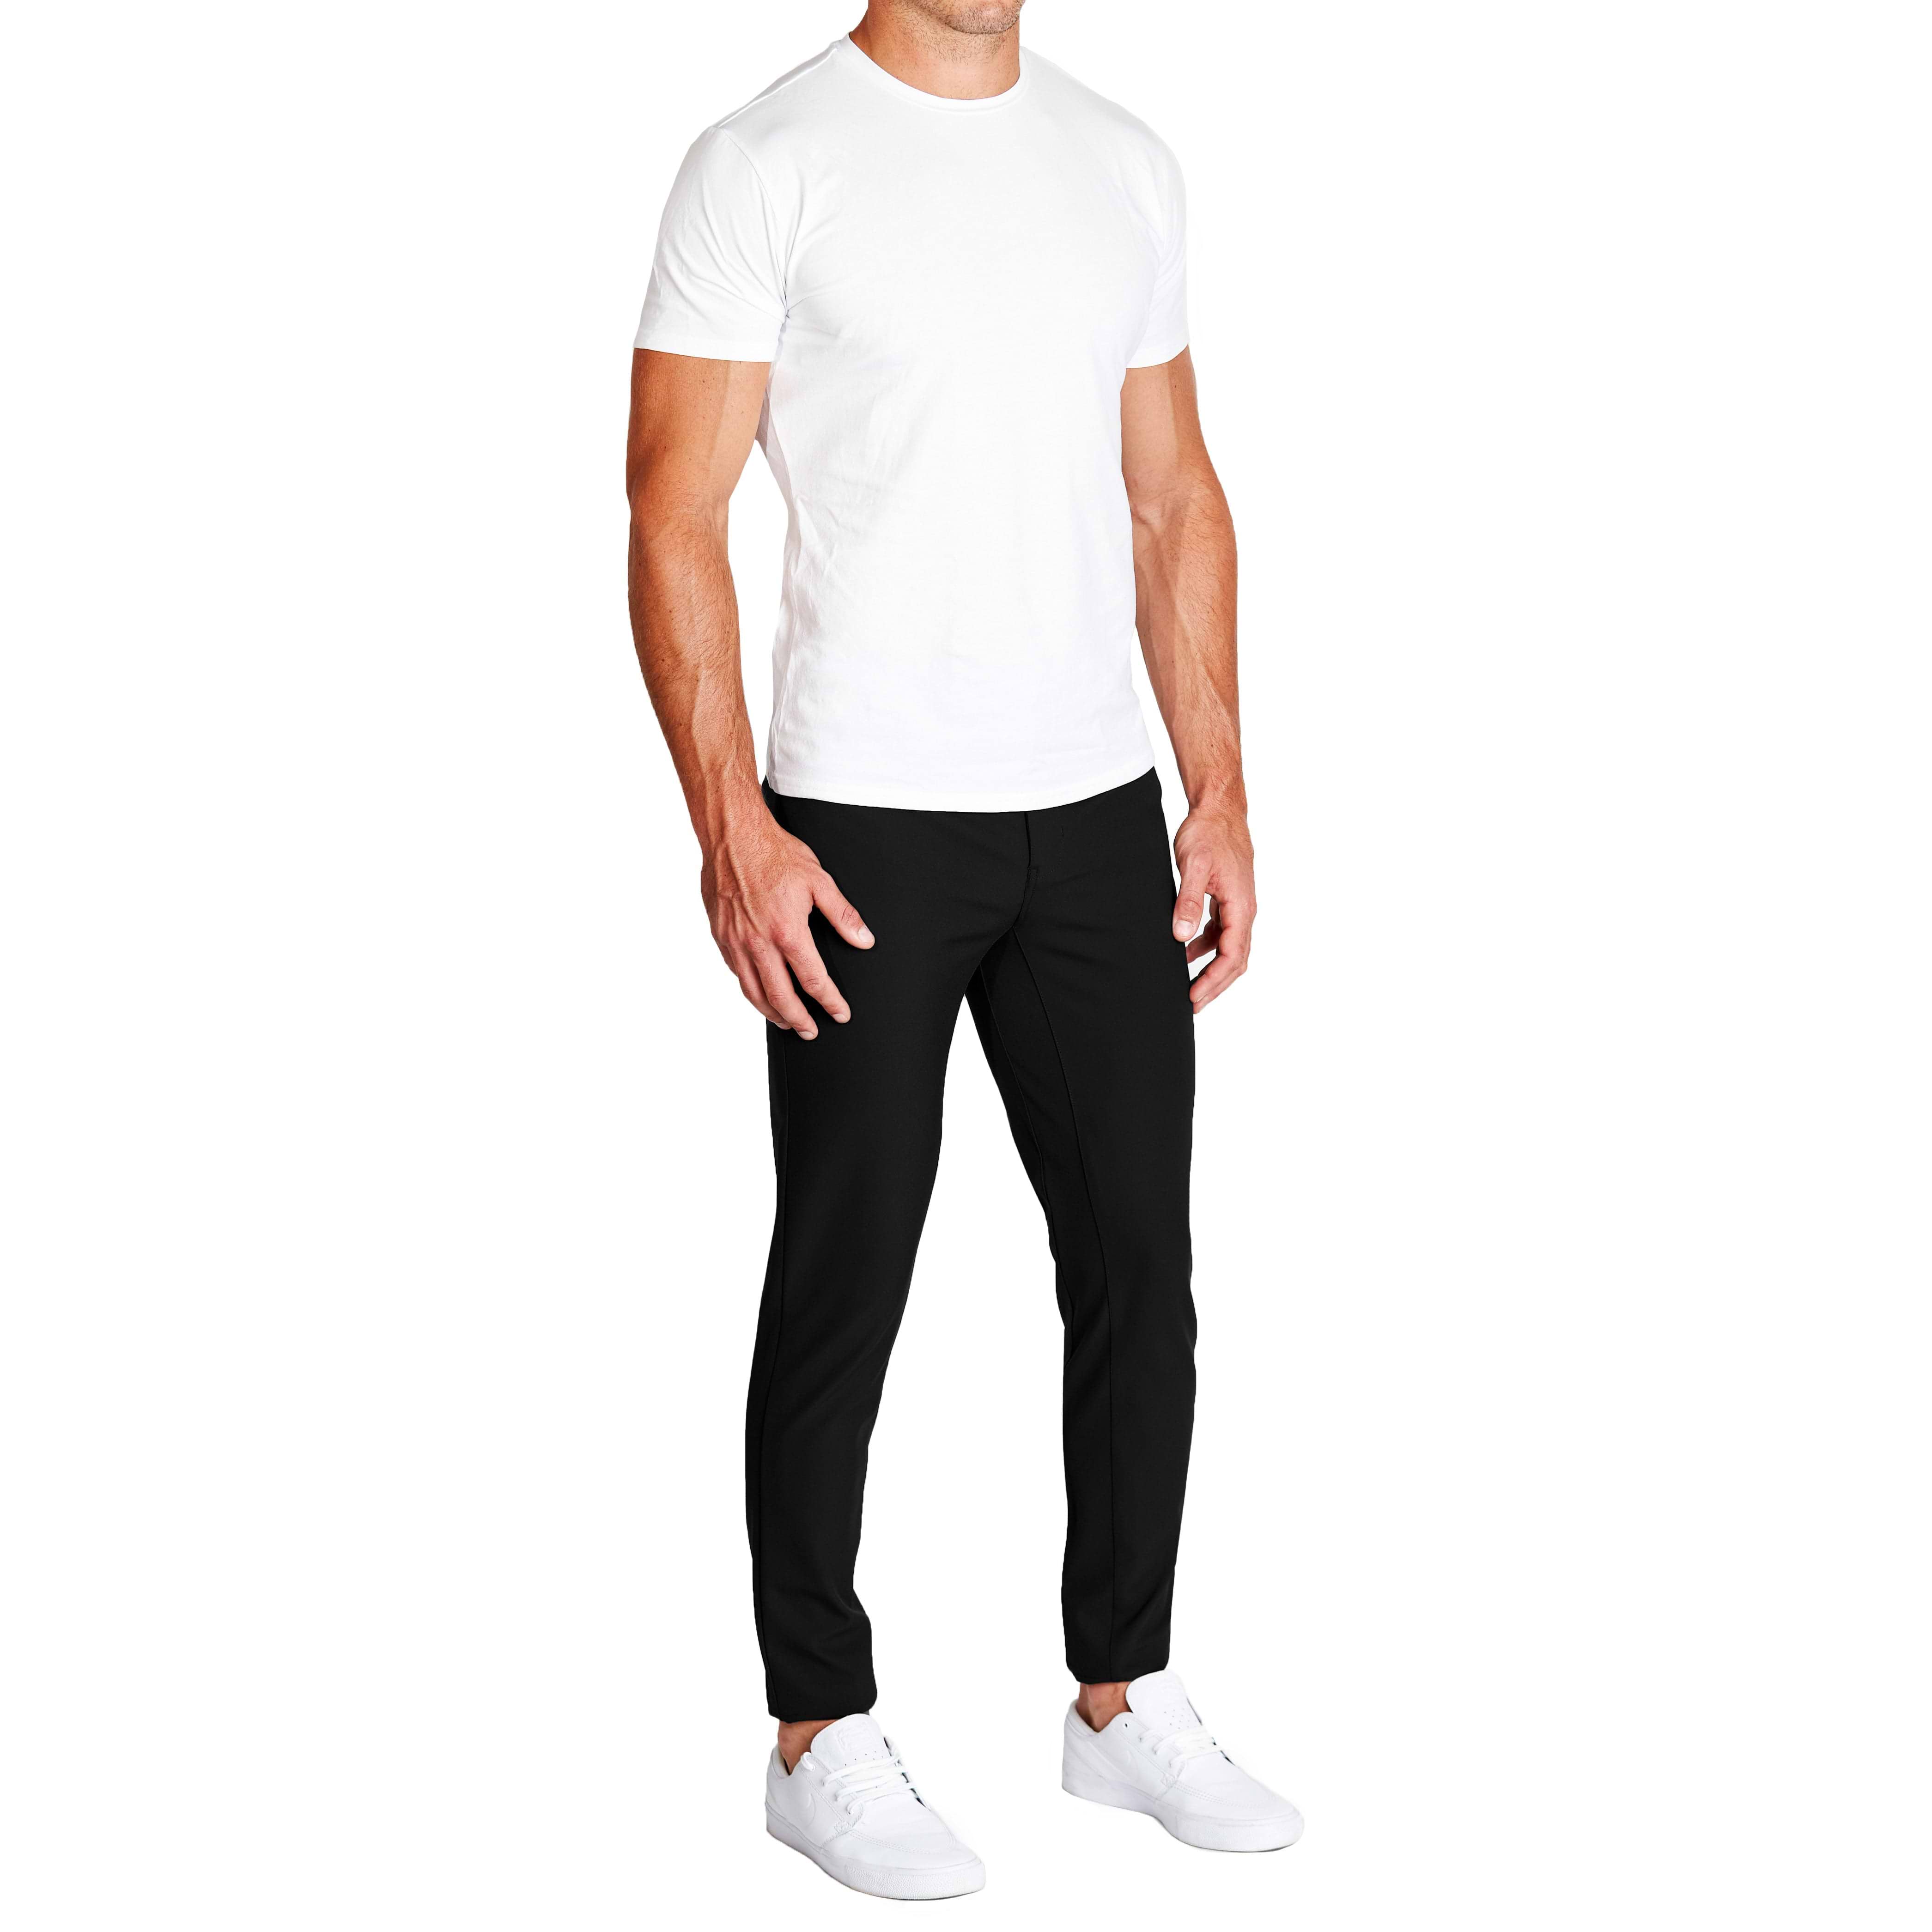 State and Liberty Clothing Company Athletic Fit Stretch Tuxedo Pants - Solid Black Waist 40 | Inseam 34-36 / Black